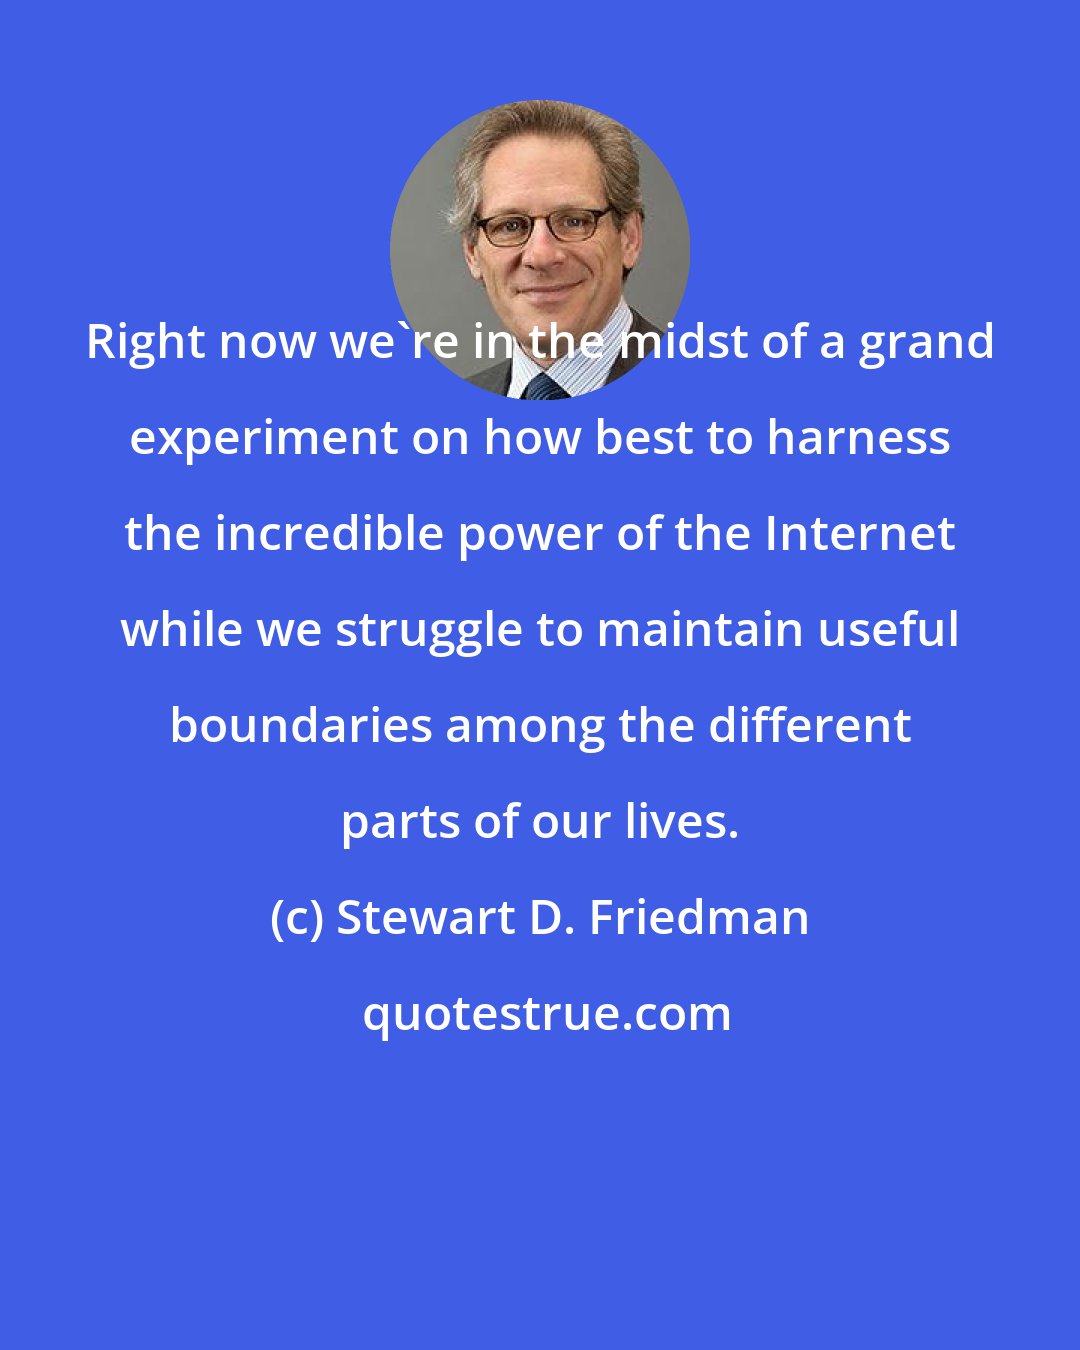 Stewart D. Friedman: Right now we're in the midst of a grand experiment on how best to harness the incredible power of the Internet while we struggle to maintain useful boundaries among the different parts of our lives.